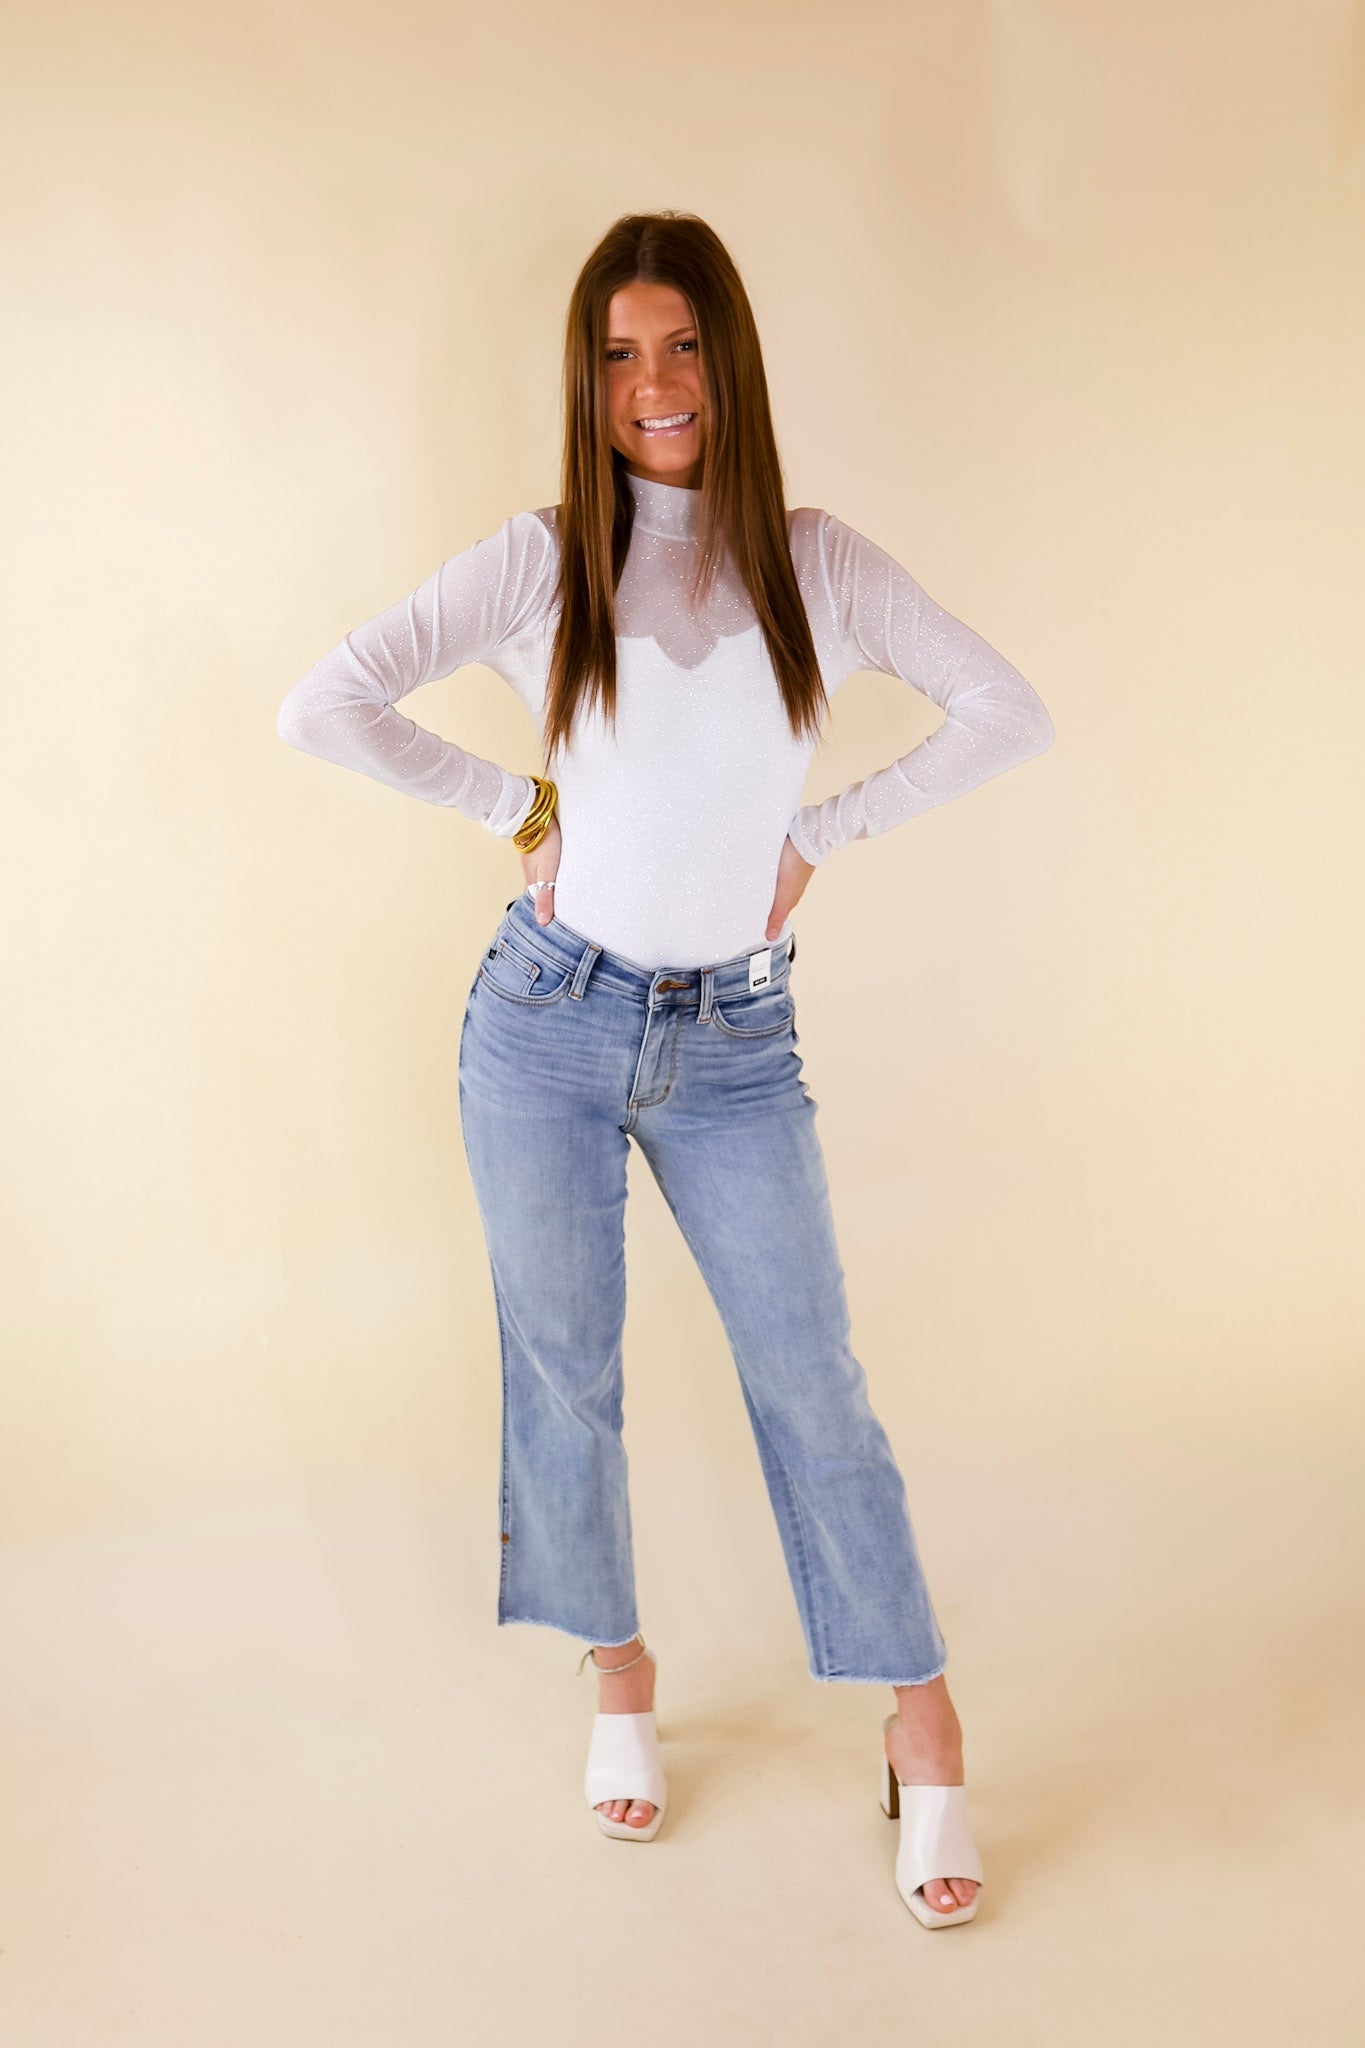 Try Your Luck Glitter Mesh Long Sleeve Bodysuit in White - Giddy Up Glamour Boutique